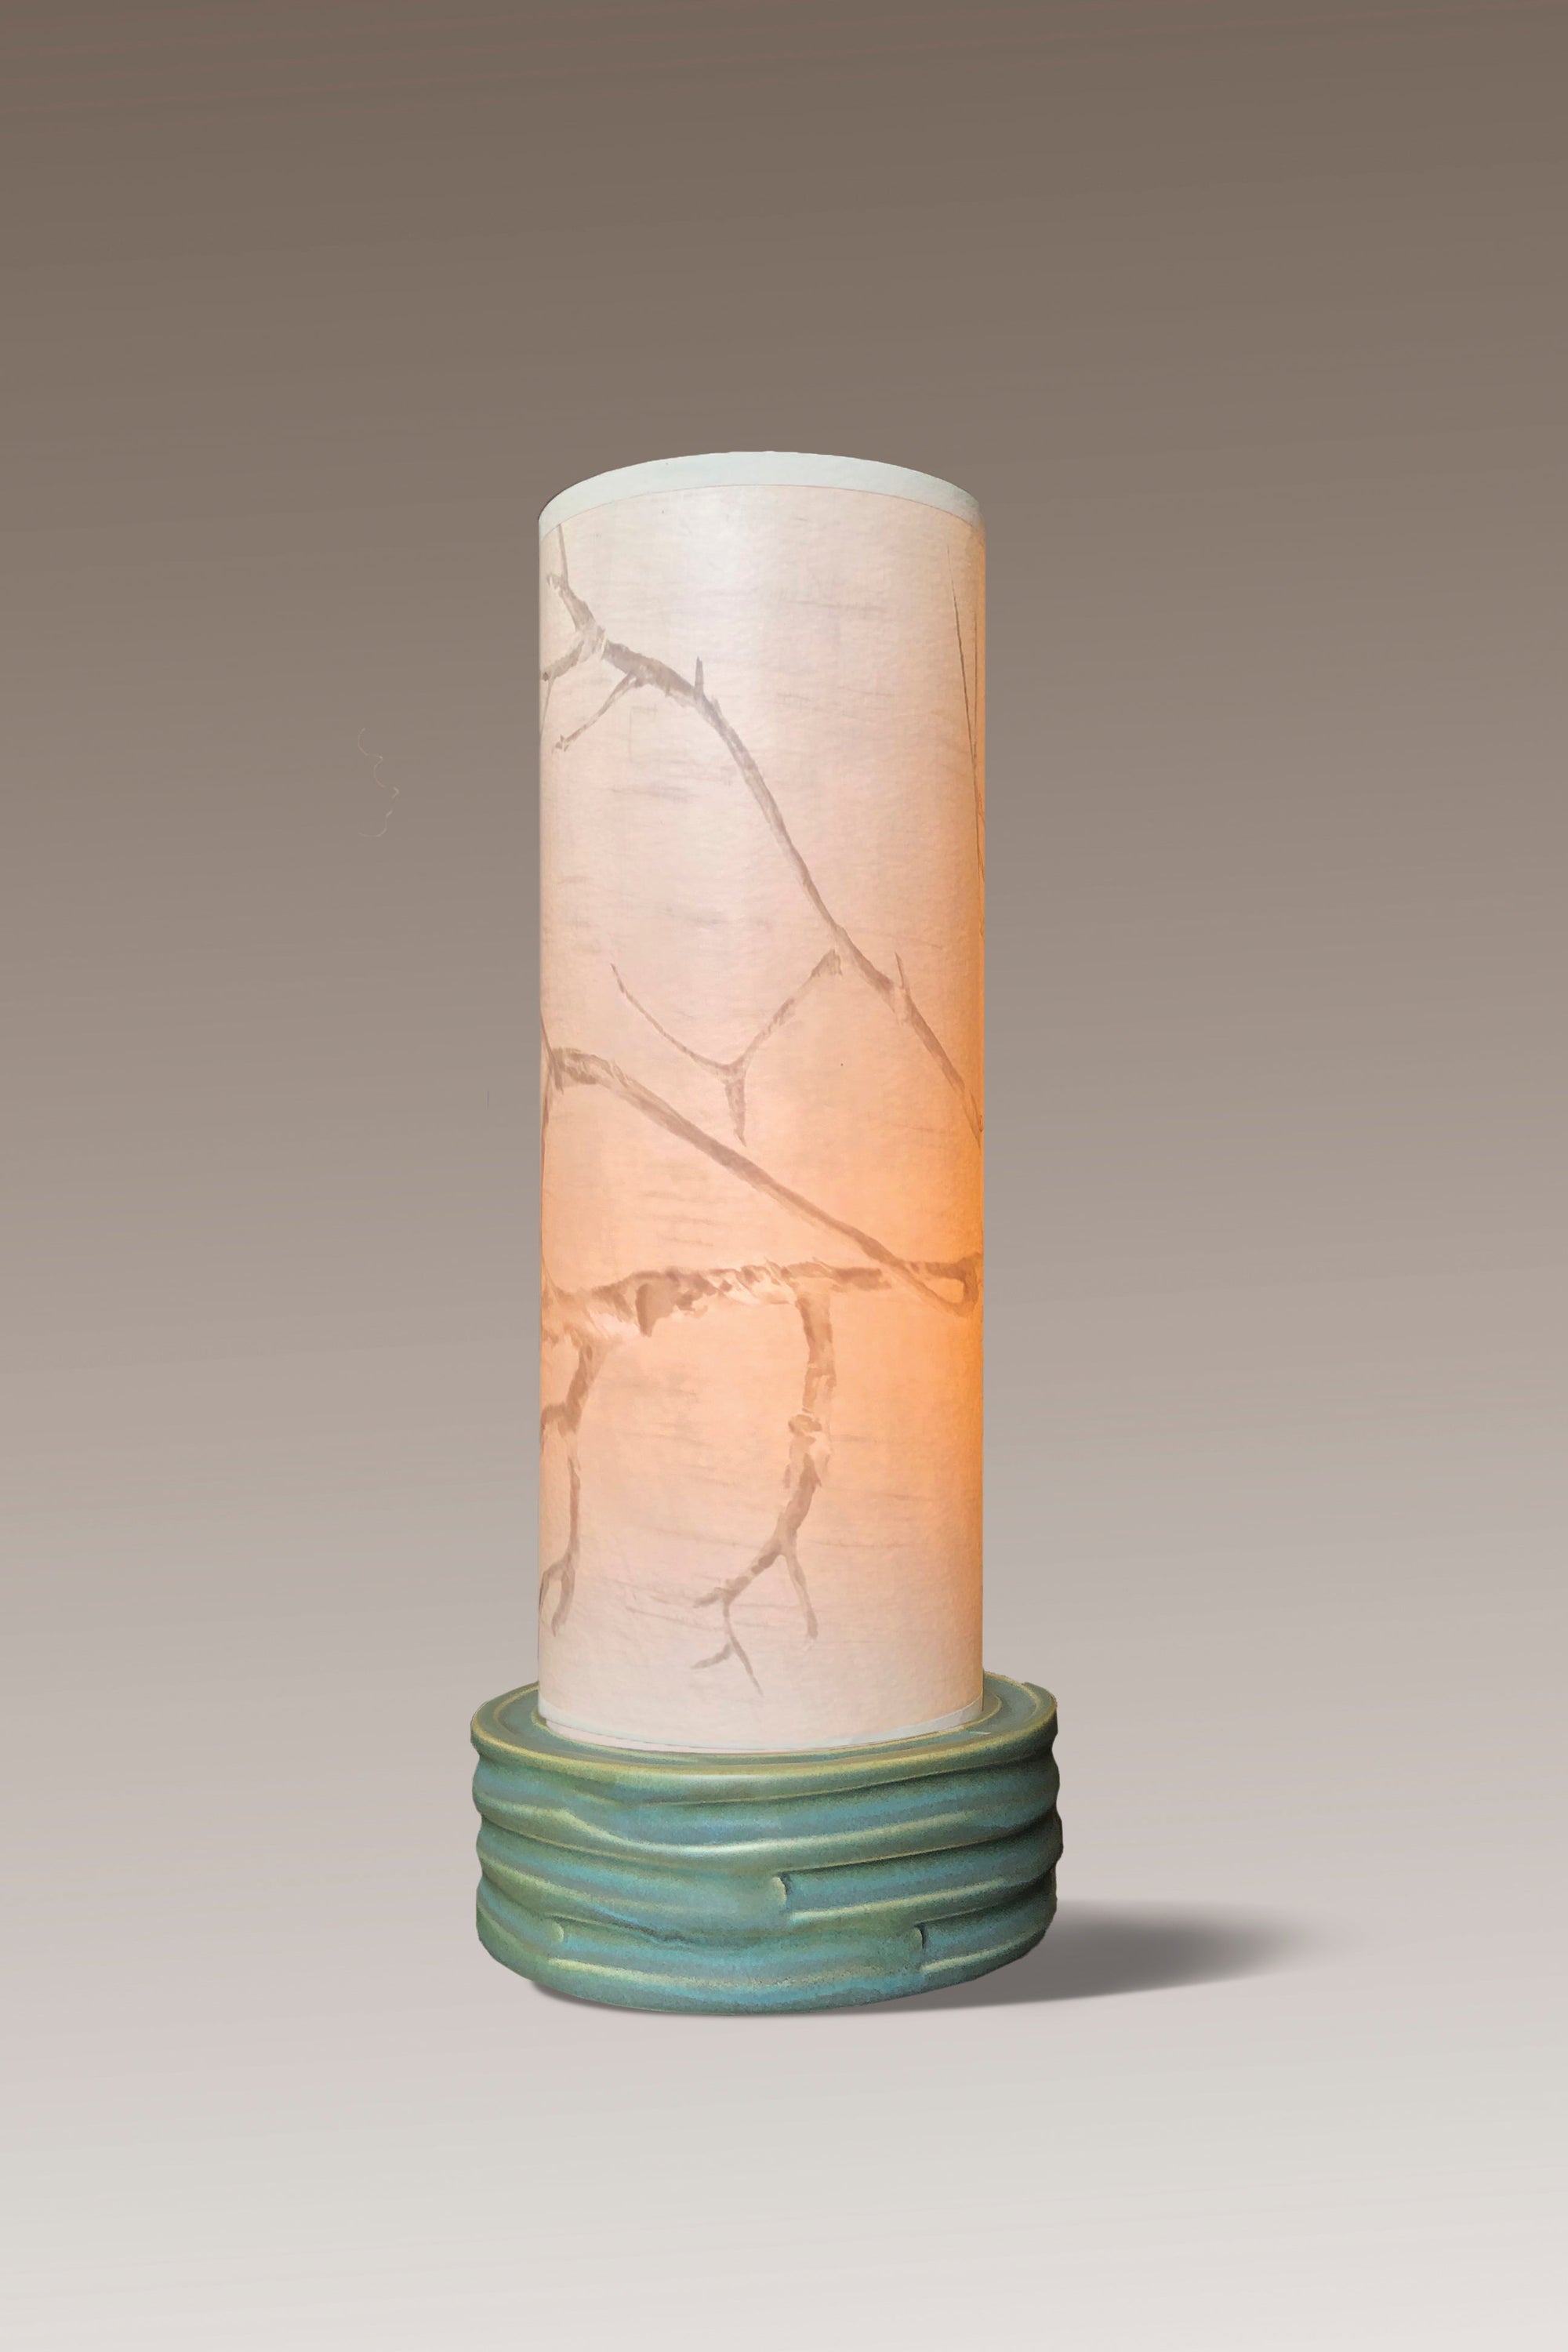 Janna Ugone & Co Luminaires Ceramic Luminaire Accent Lamp with Sweeping Branch Shade